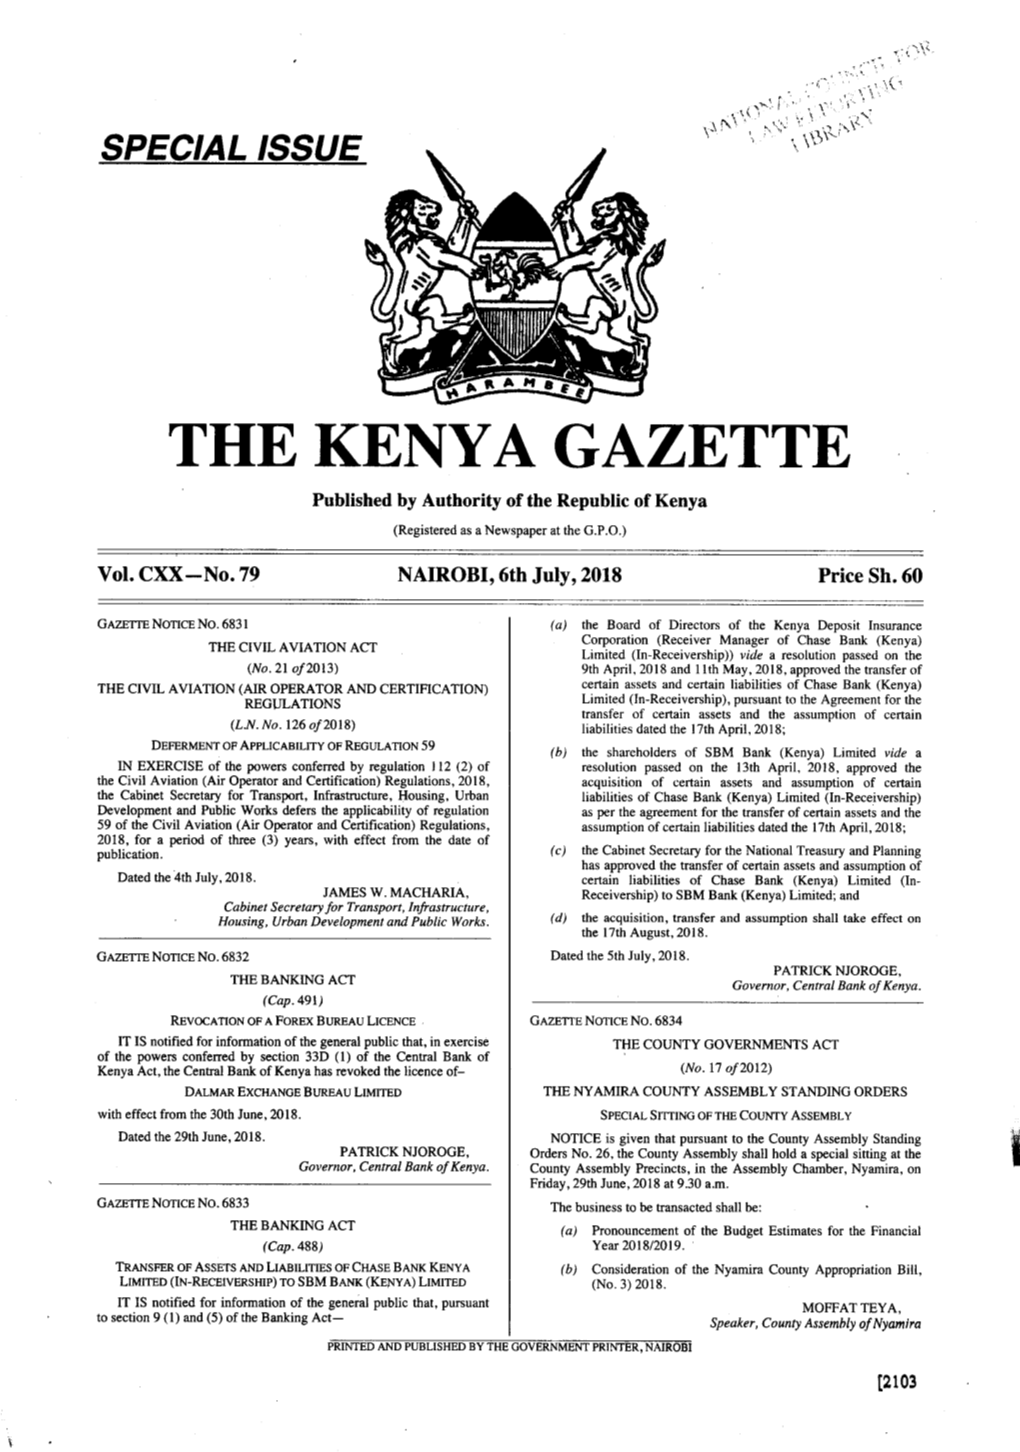 THE KENYA GAZETTE Published by Authority of the Republic of Kenya (Registered As a Newspaper at the G.P.O.) � � Vol